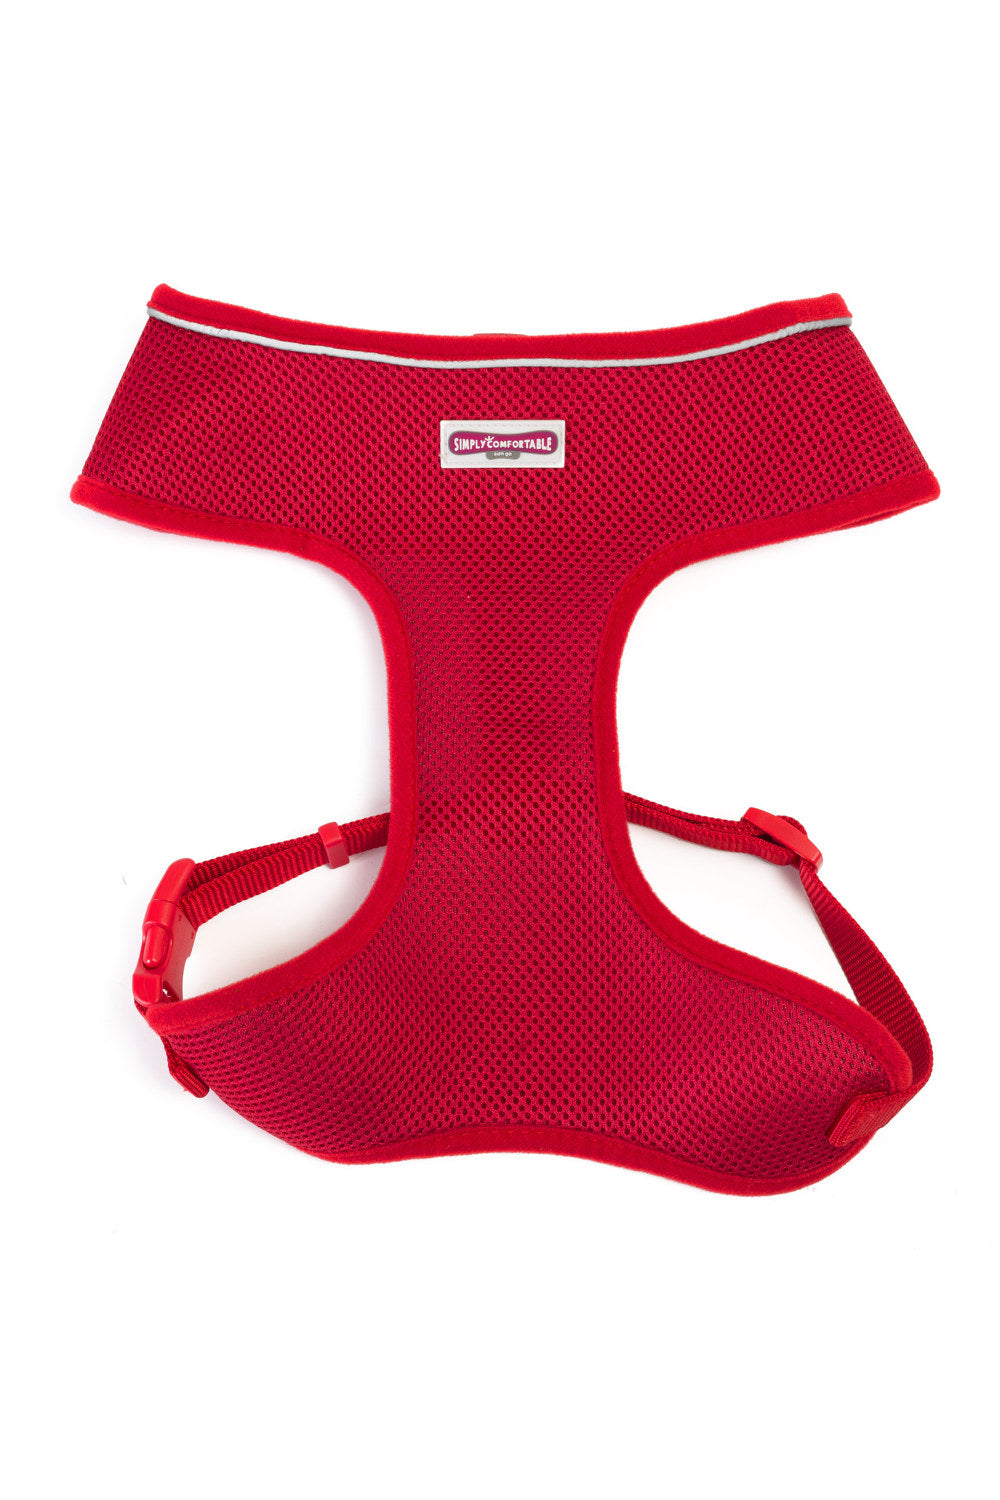 Ancol Comfort Mesh Dog Harness (Red) (Extra Small)